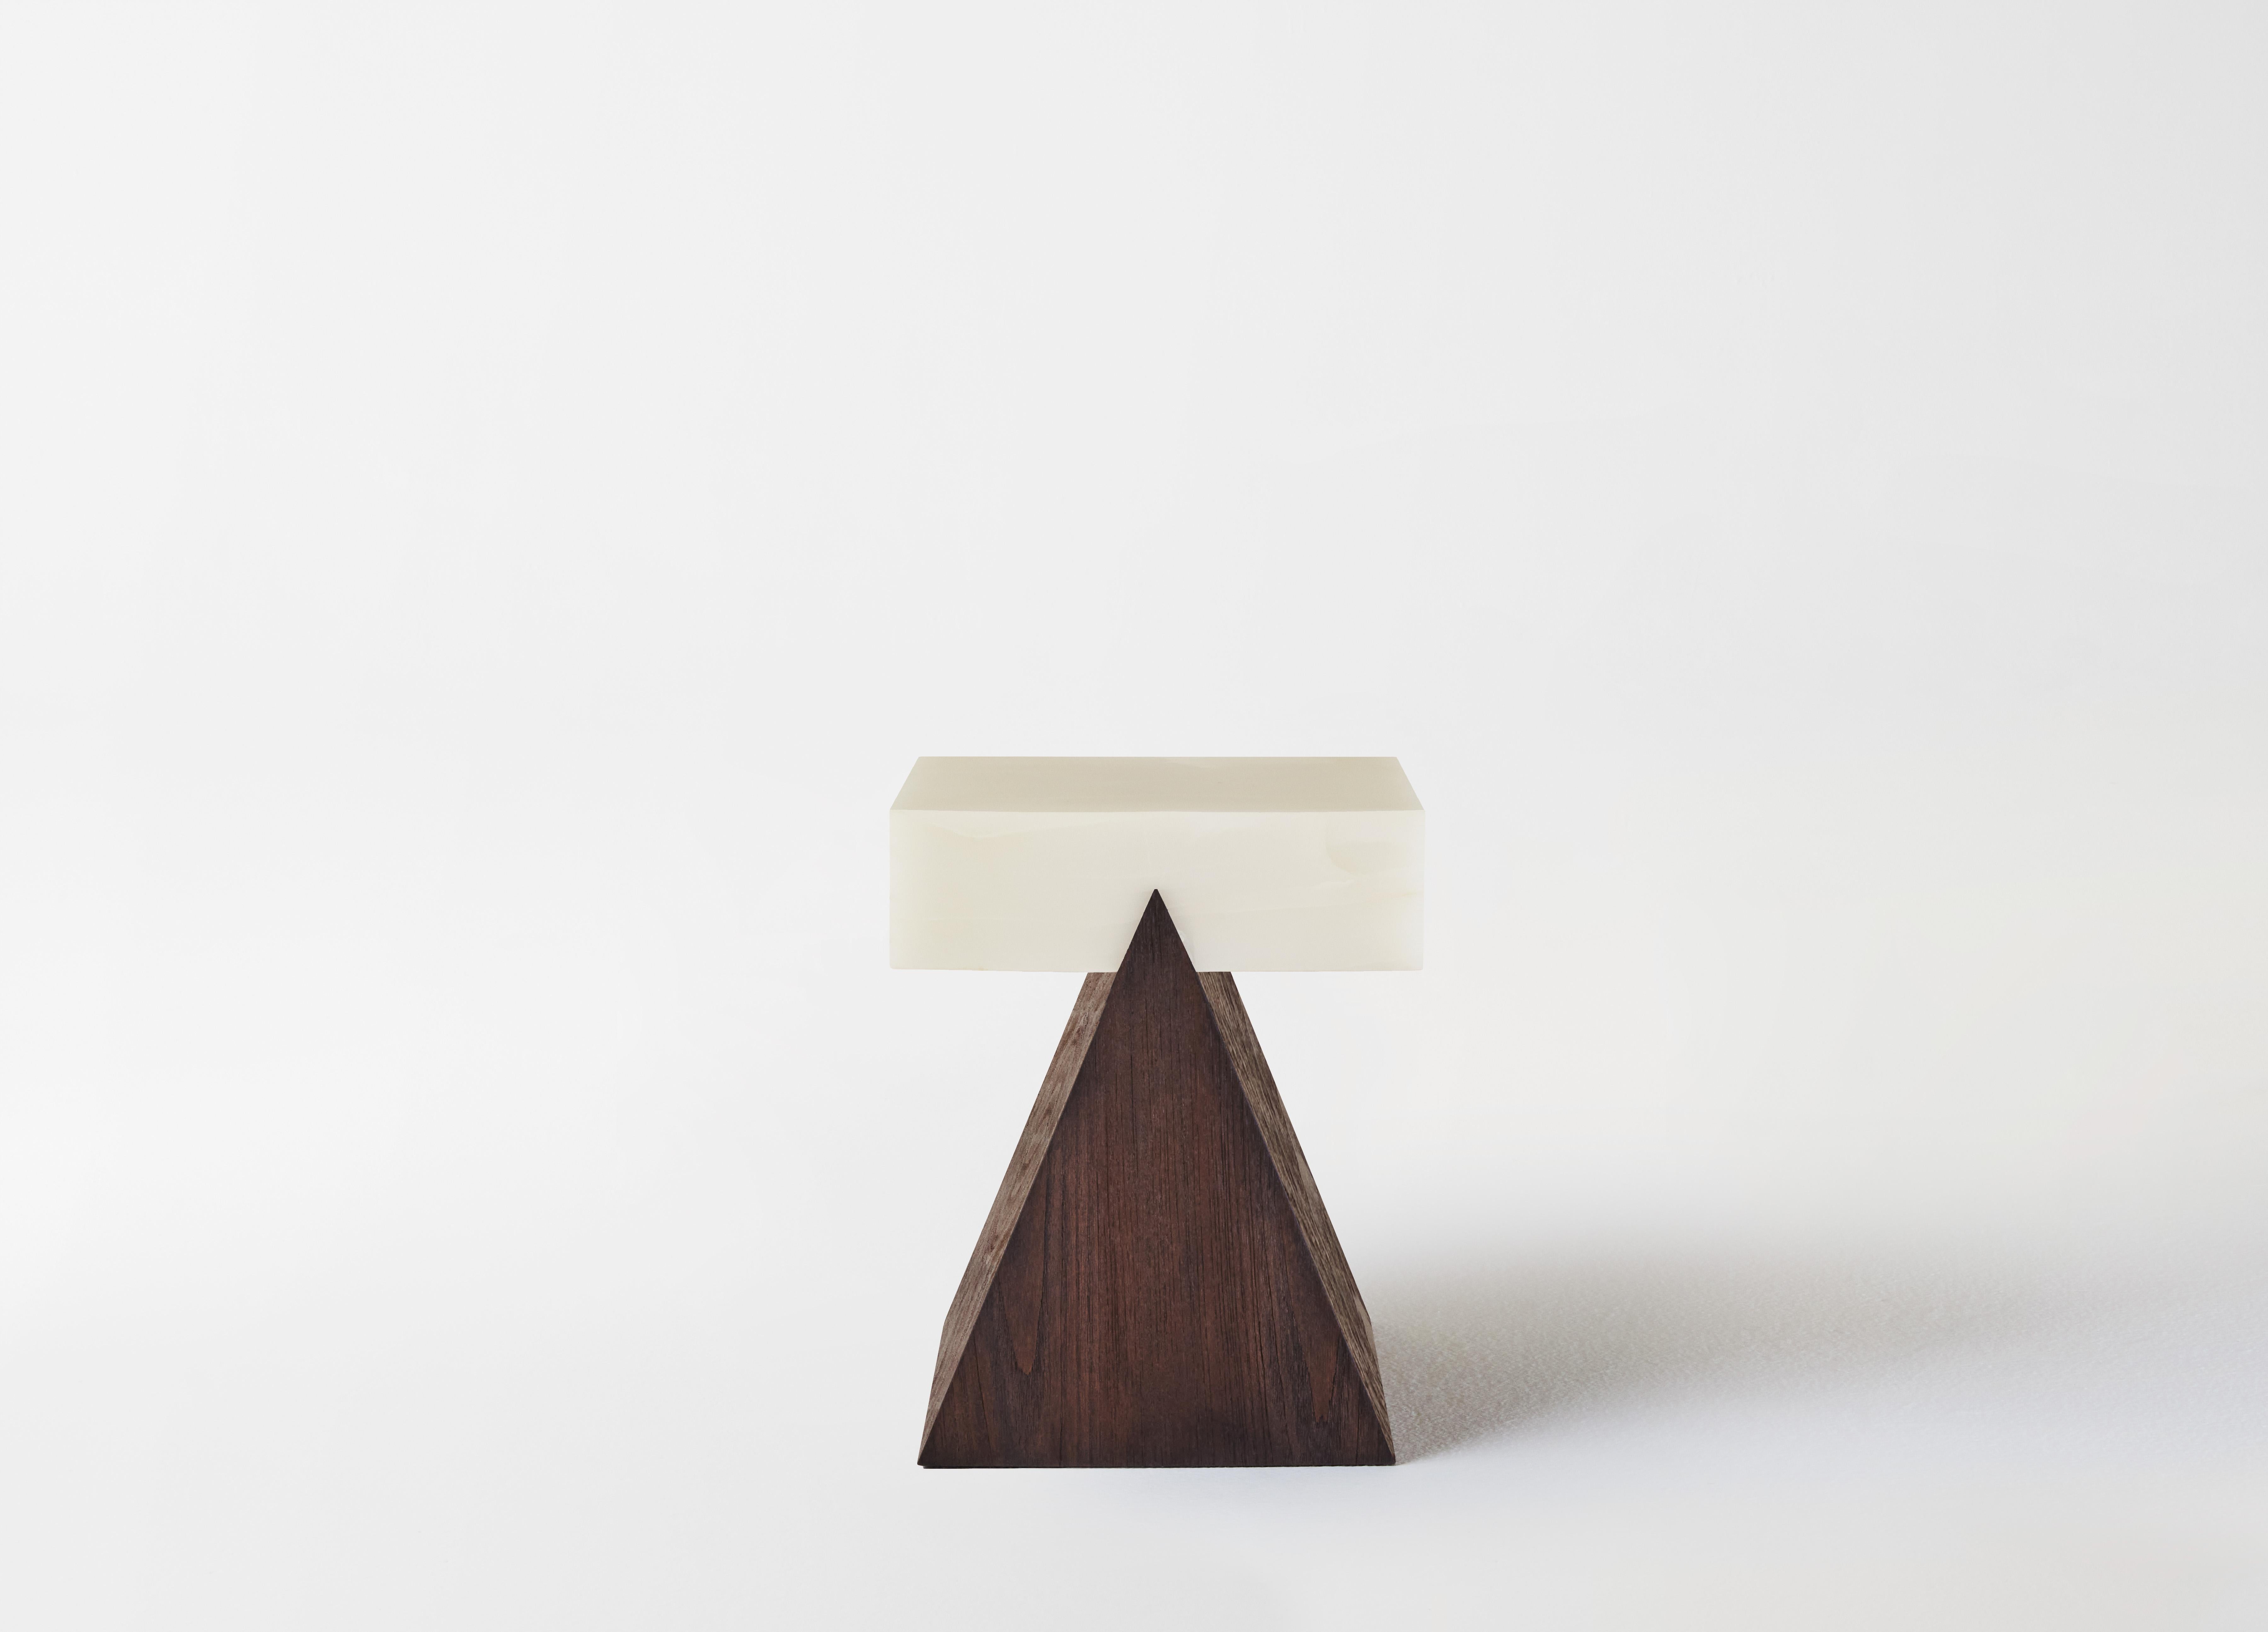 Aman’s Trini Side Table combines craftsmanship with spiritual resonance. The triangular shape stands as testament to strength, stability, and unity. The juxtaposition in the materiality – with its wooden base and immense Onyx top – invite an